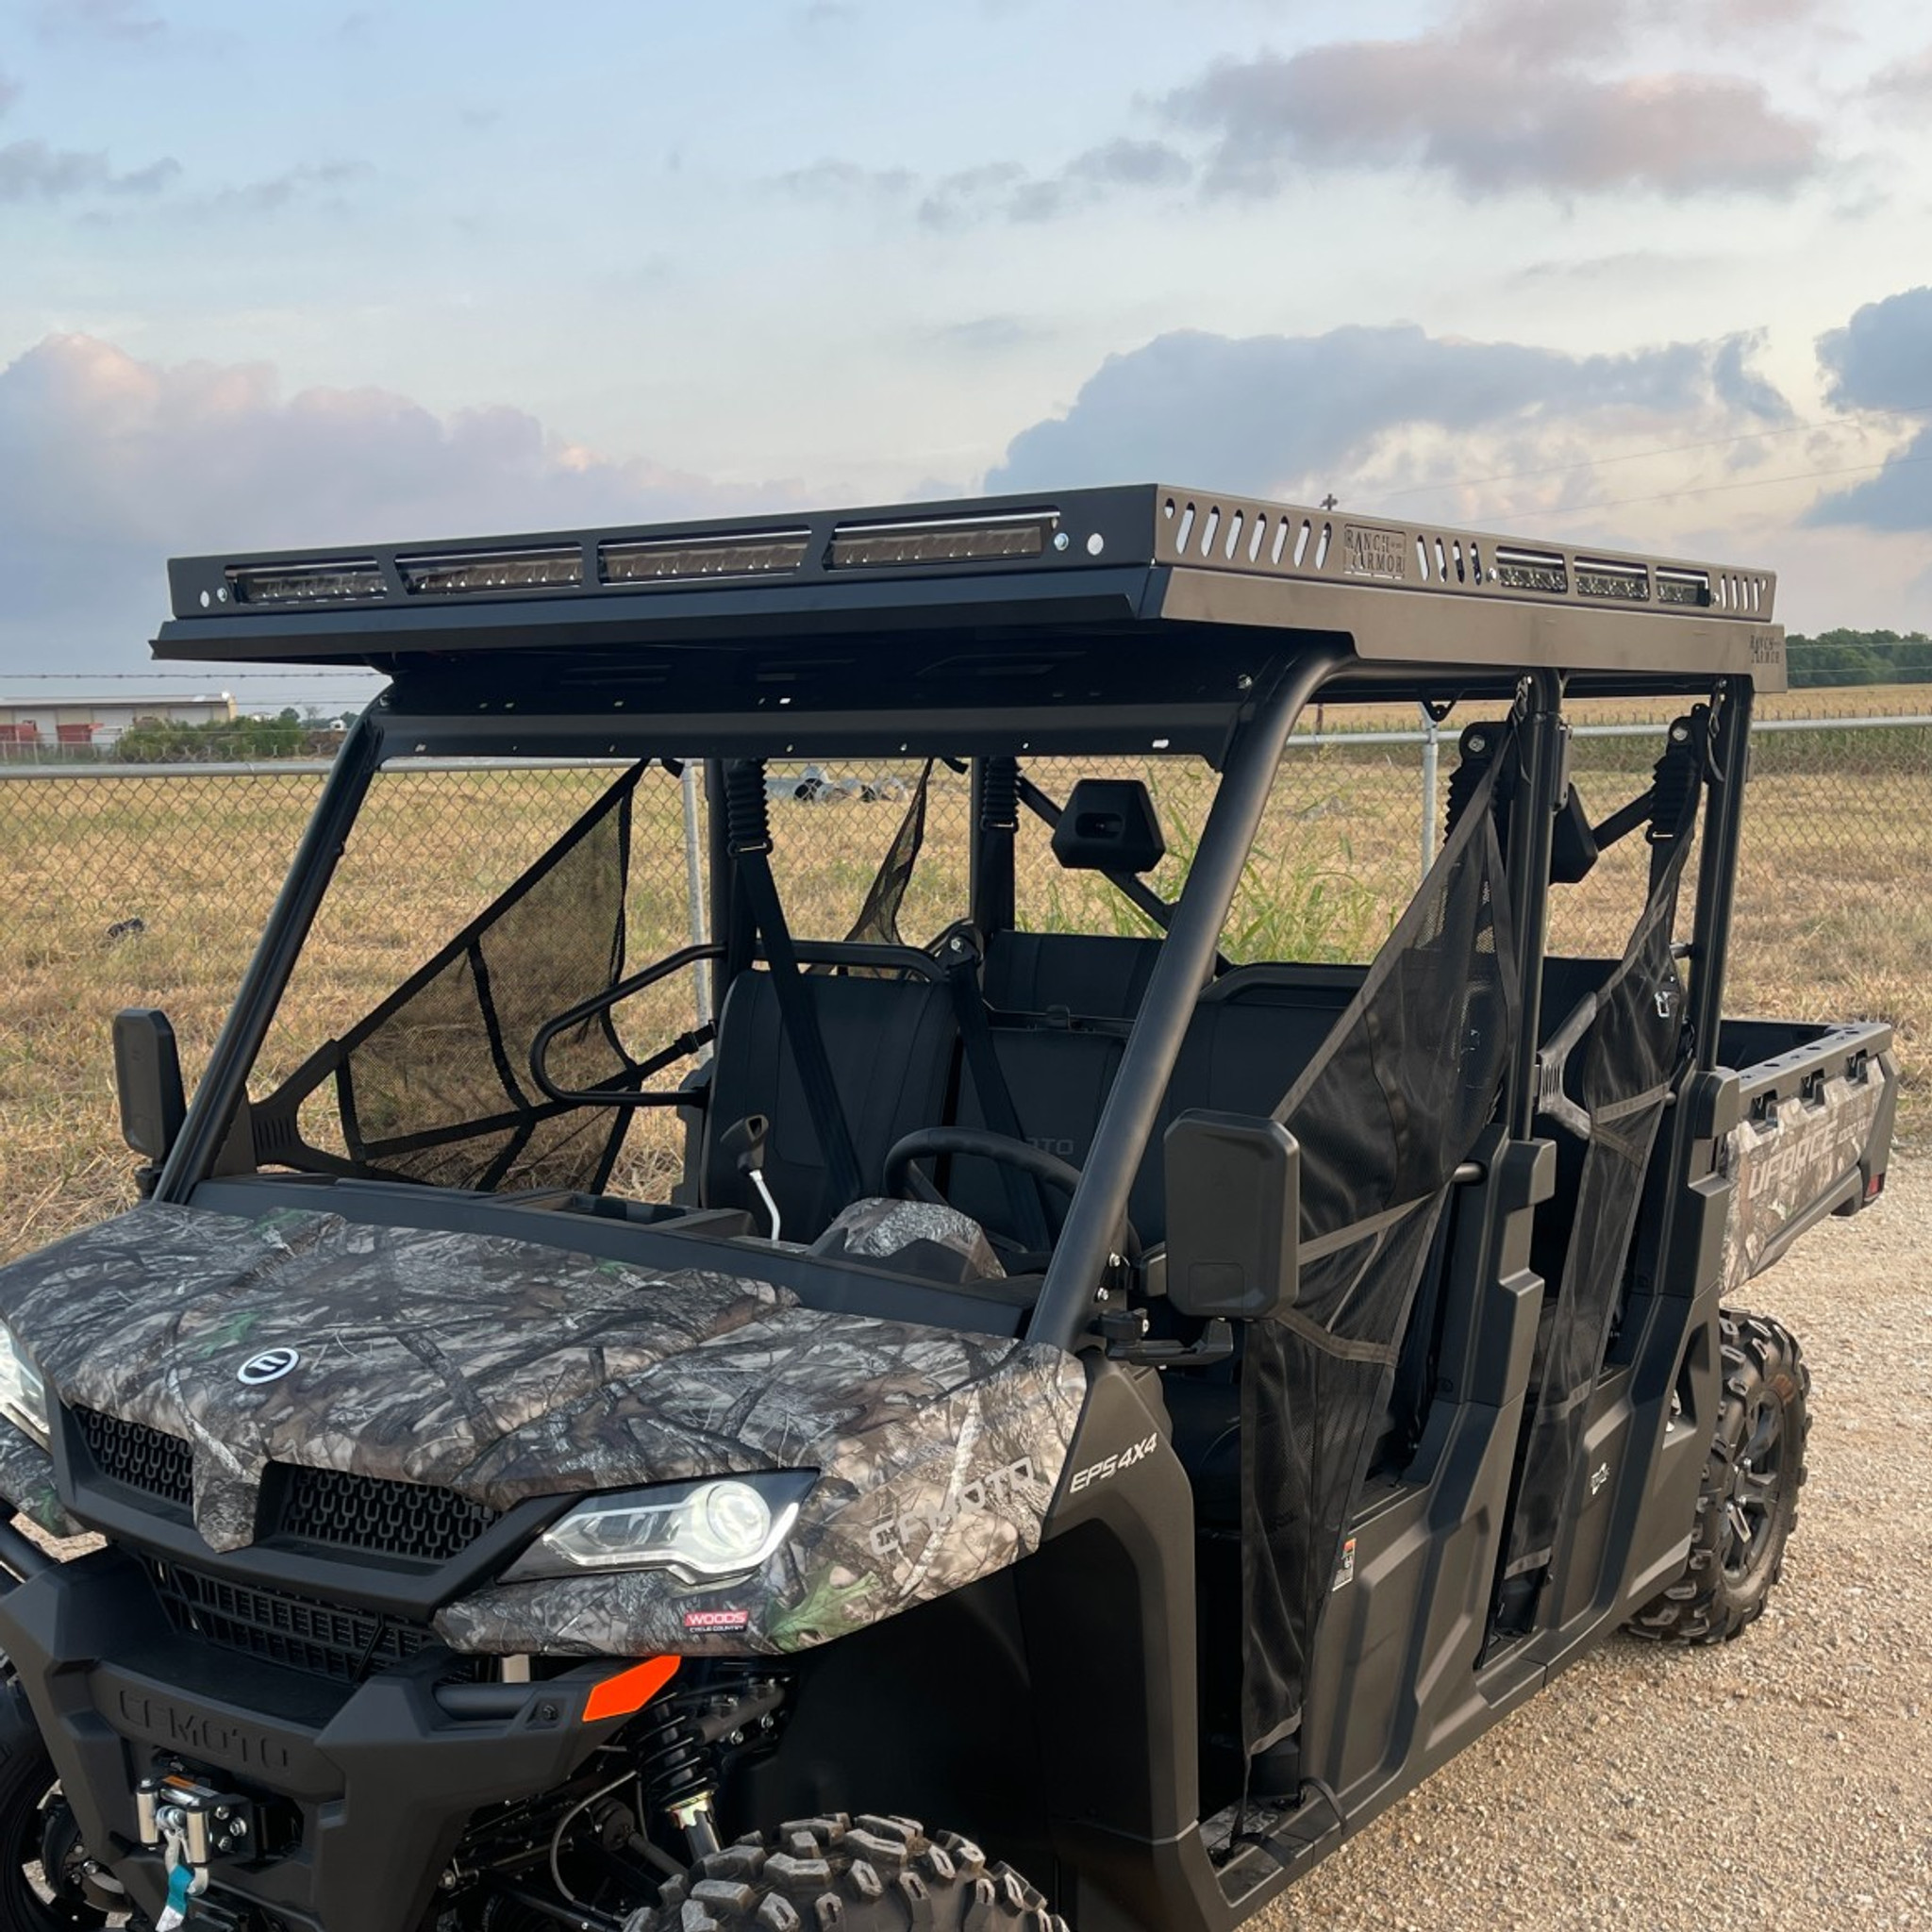 https://cdn11.bigcommerce.com/s-xxgi966x/images/stencil/2048x2048/products/352/1920/CFMOTO_1000_XL_Roof_Rack_with_Light_Bars_by_Ranch_Armor__76276.1663858093.jpg?c=2